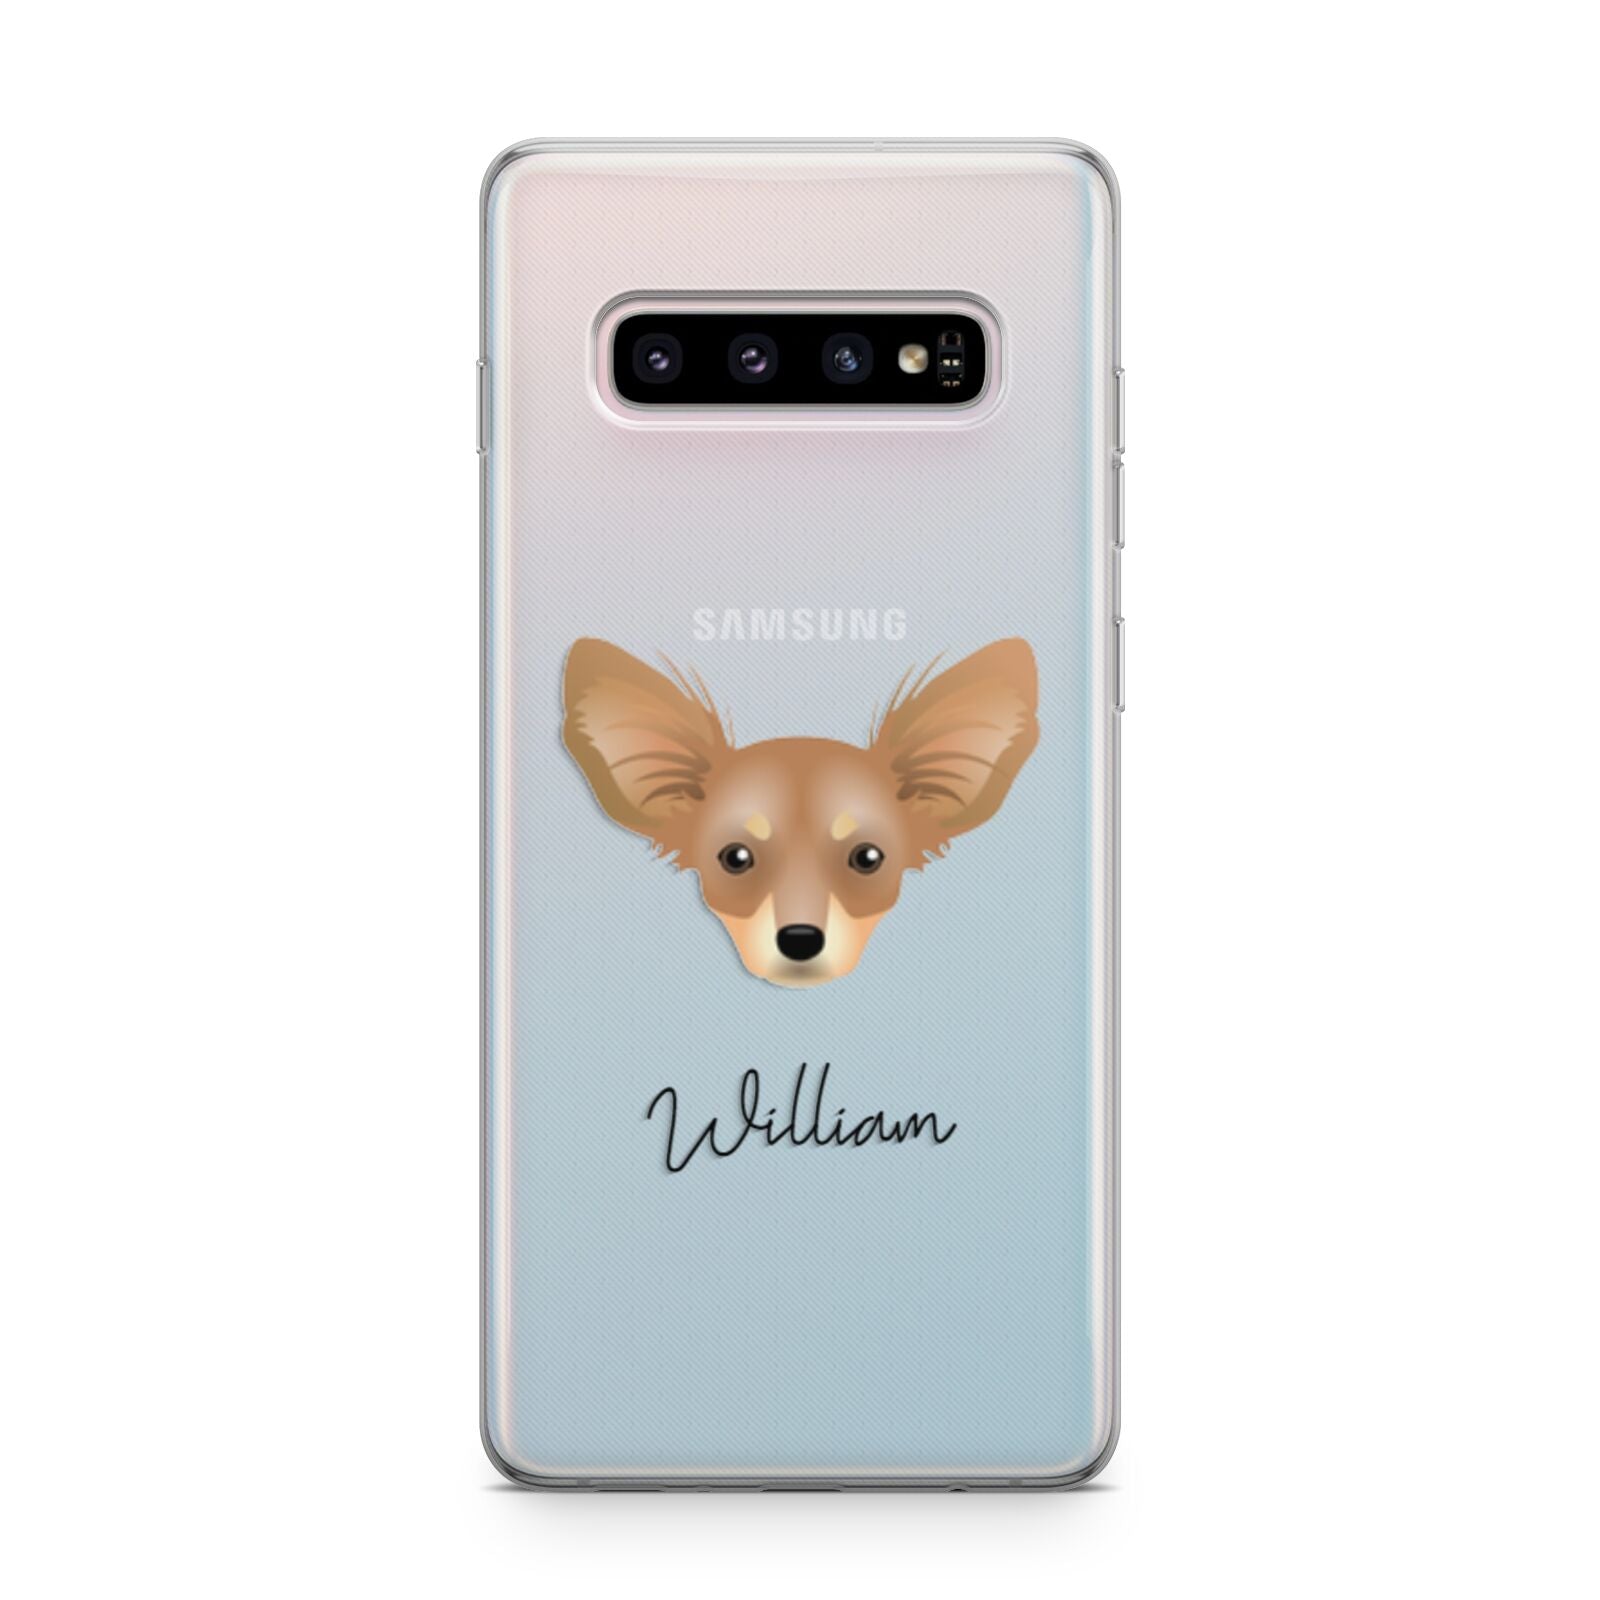 Russian Toy Personalised Samsung Galaxy S10 Plus Case